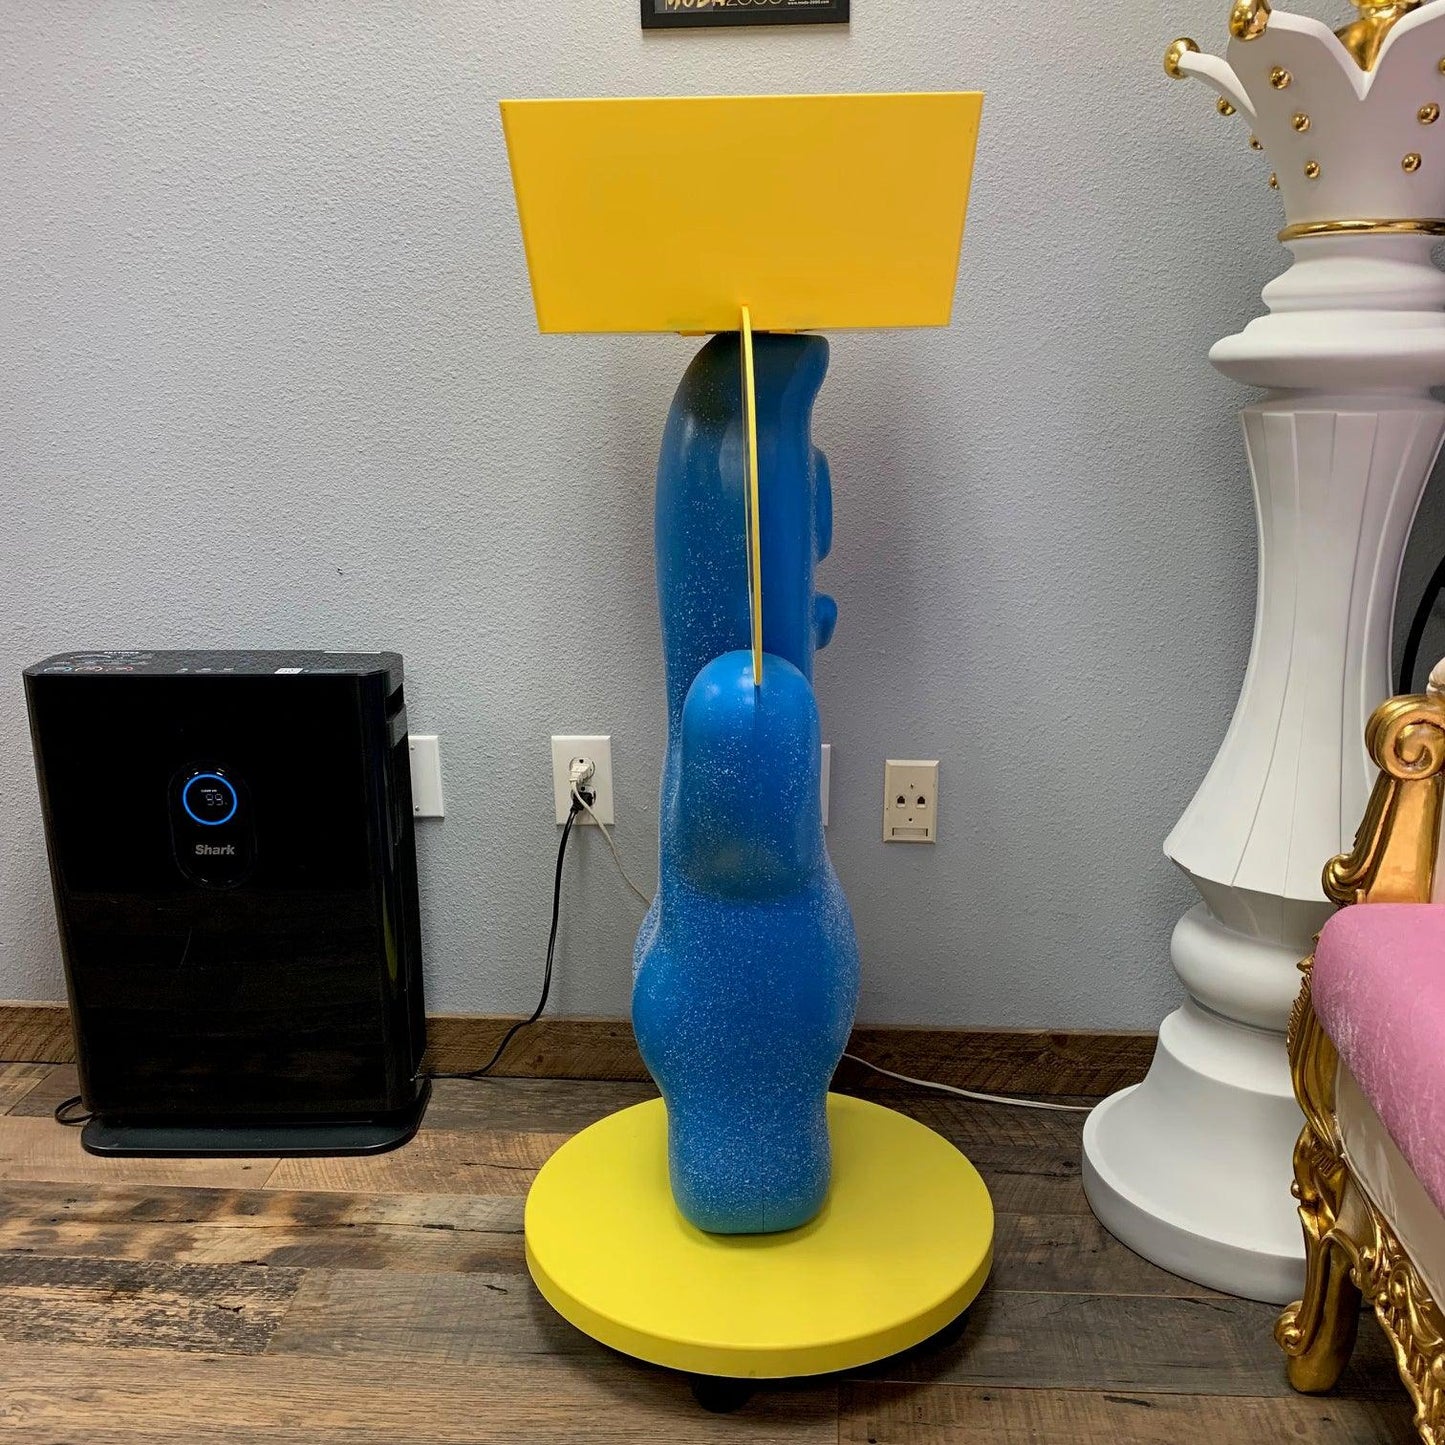 Blue Sour Patch Kid Tray Statue - LM Treasures Prop Rentals 